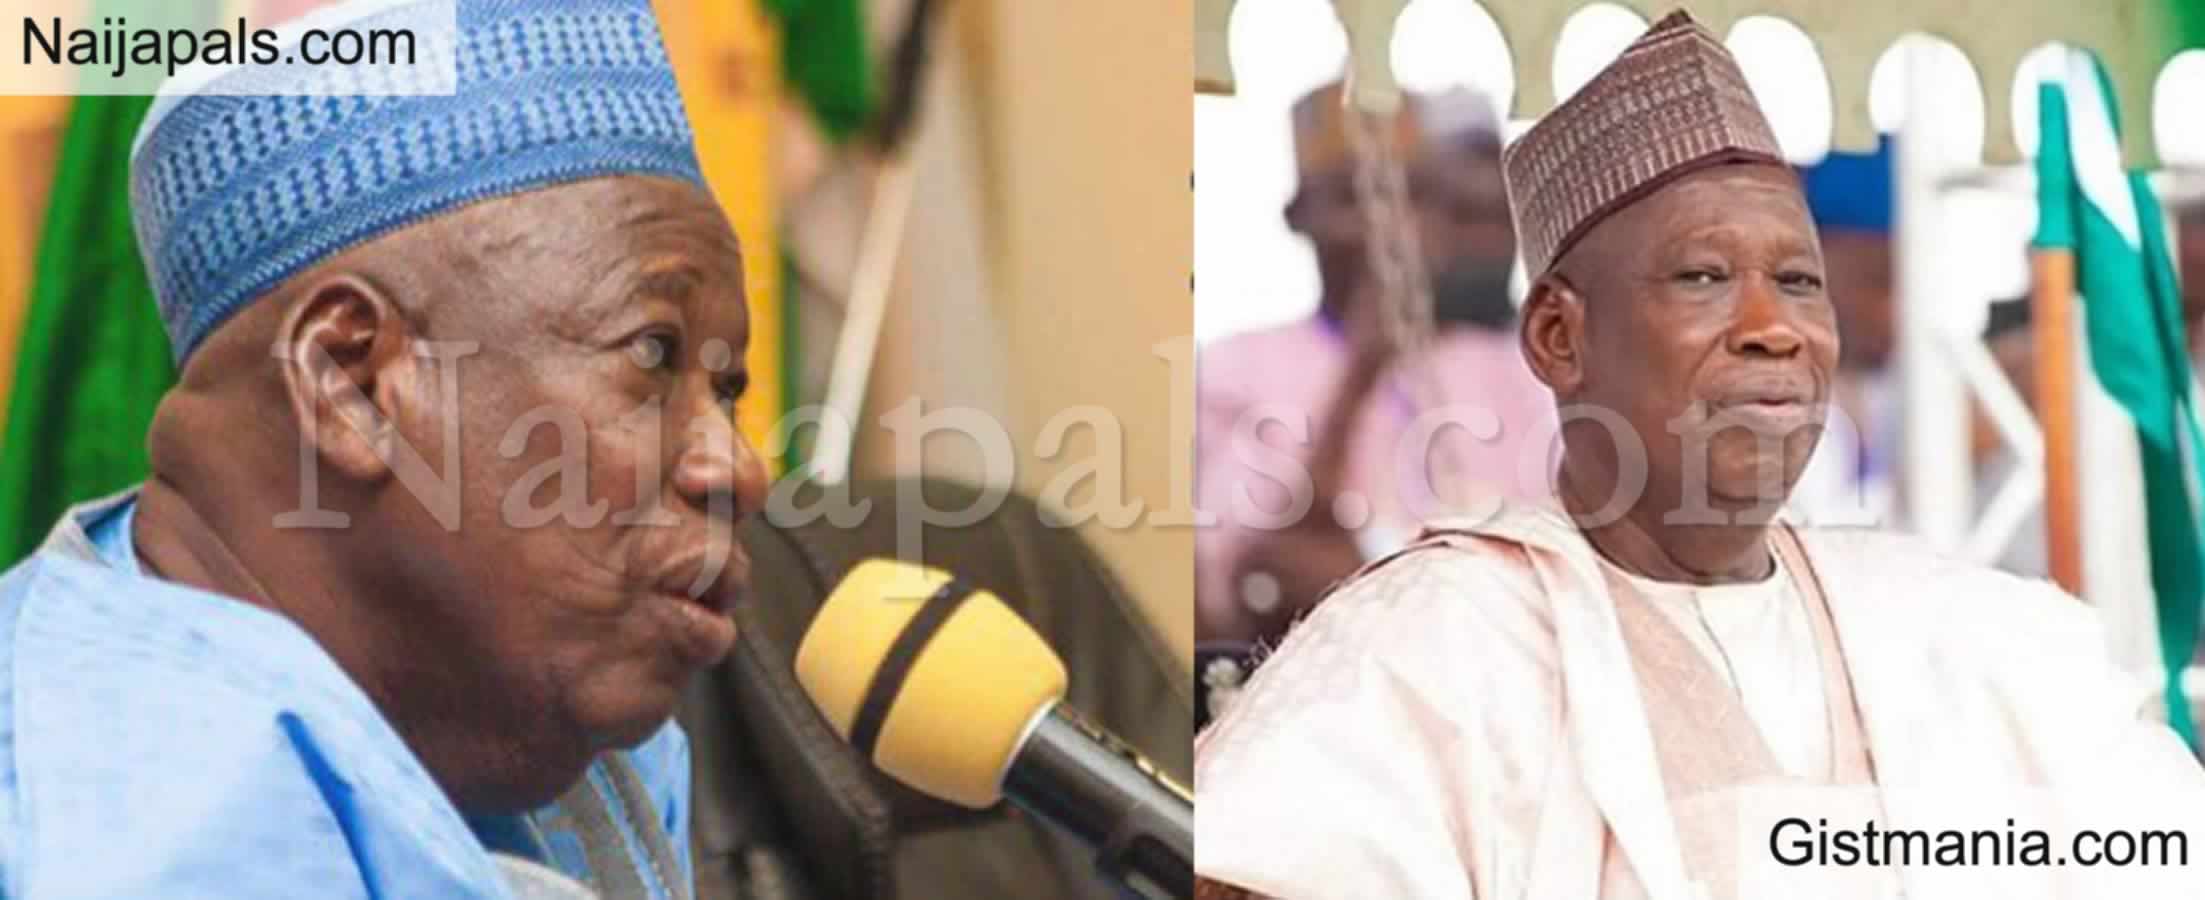 APC Reacts To Claims That Presidency Is Involved In Ganduje’s Suspension